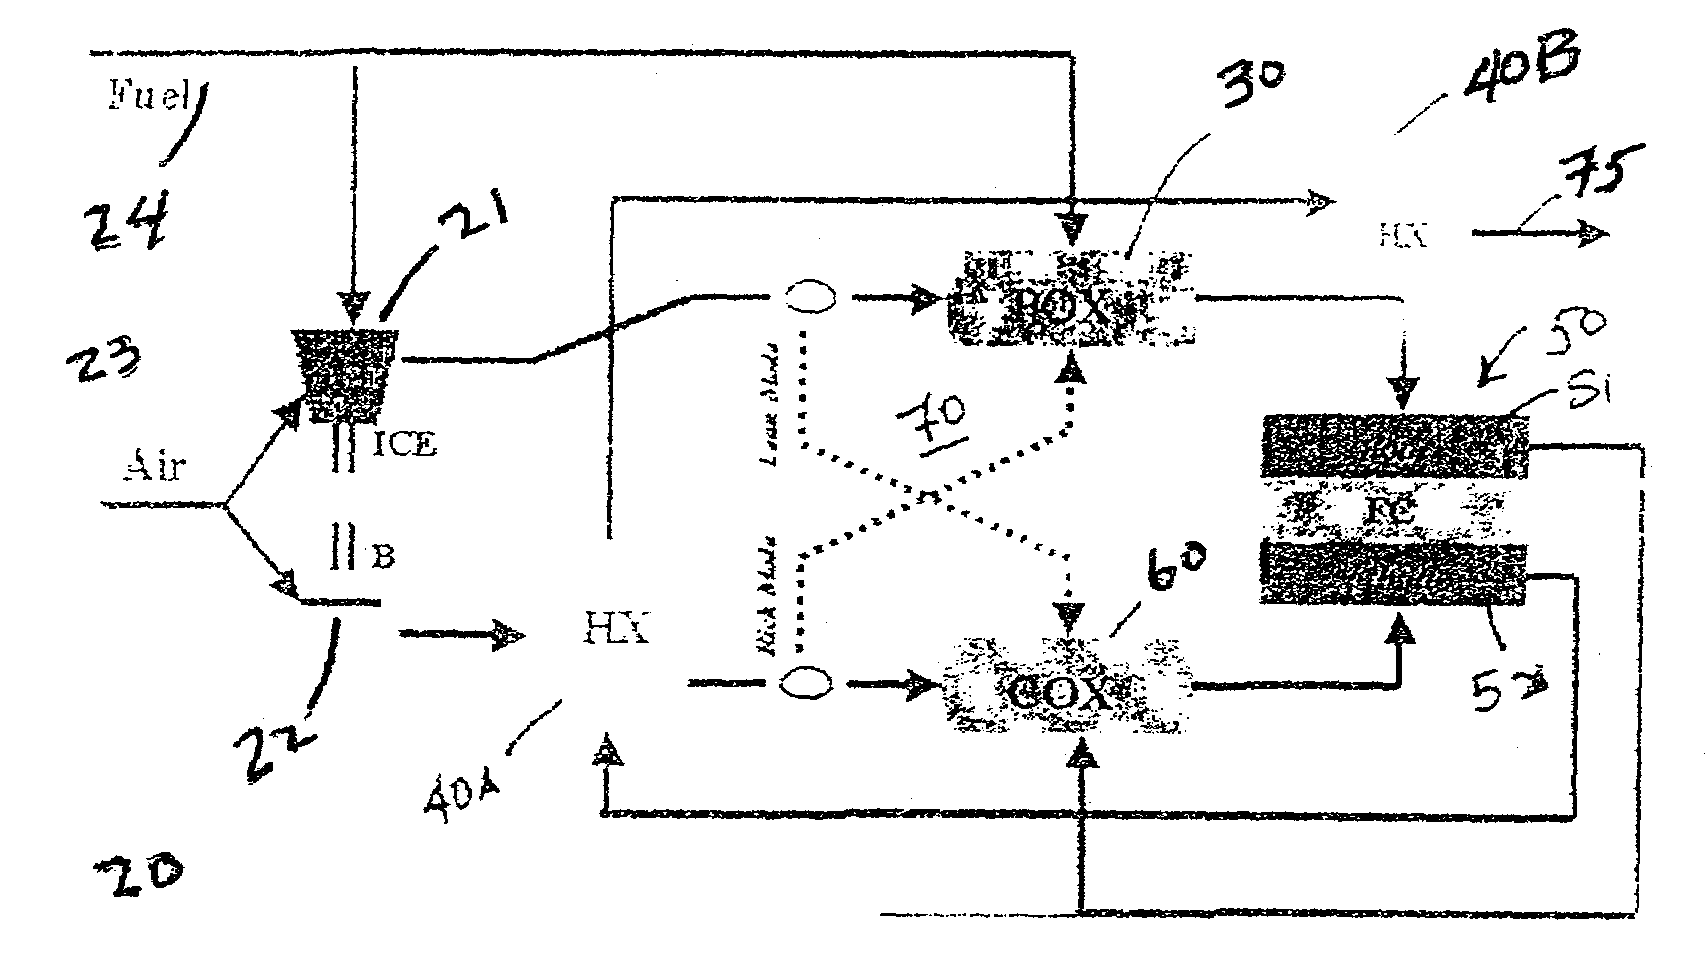 Direct fired reciprocating engine and bottoming high temperature fuel cell hybrid